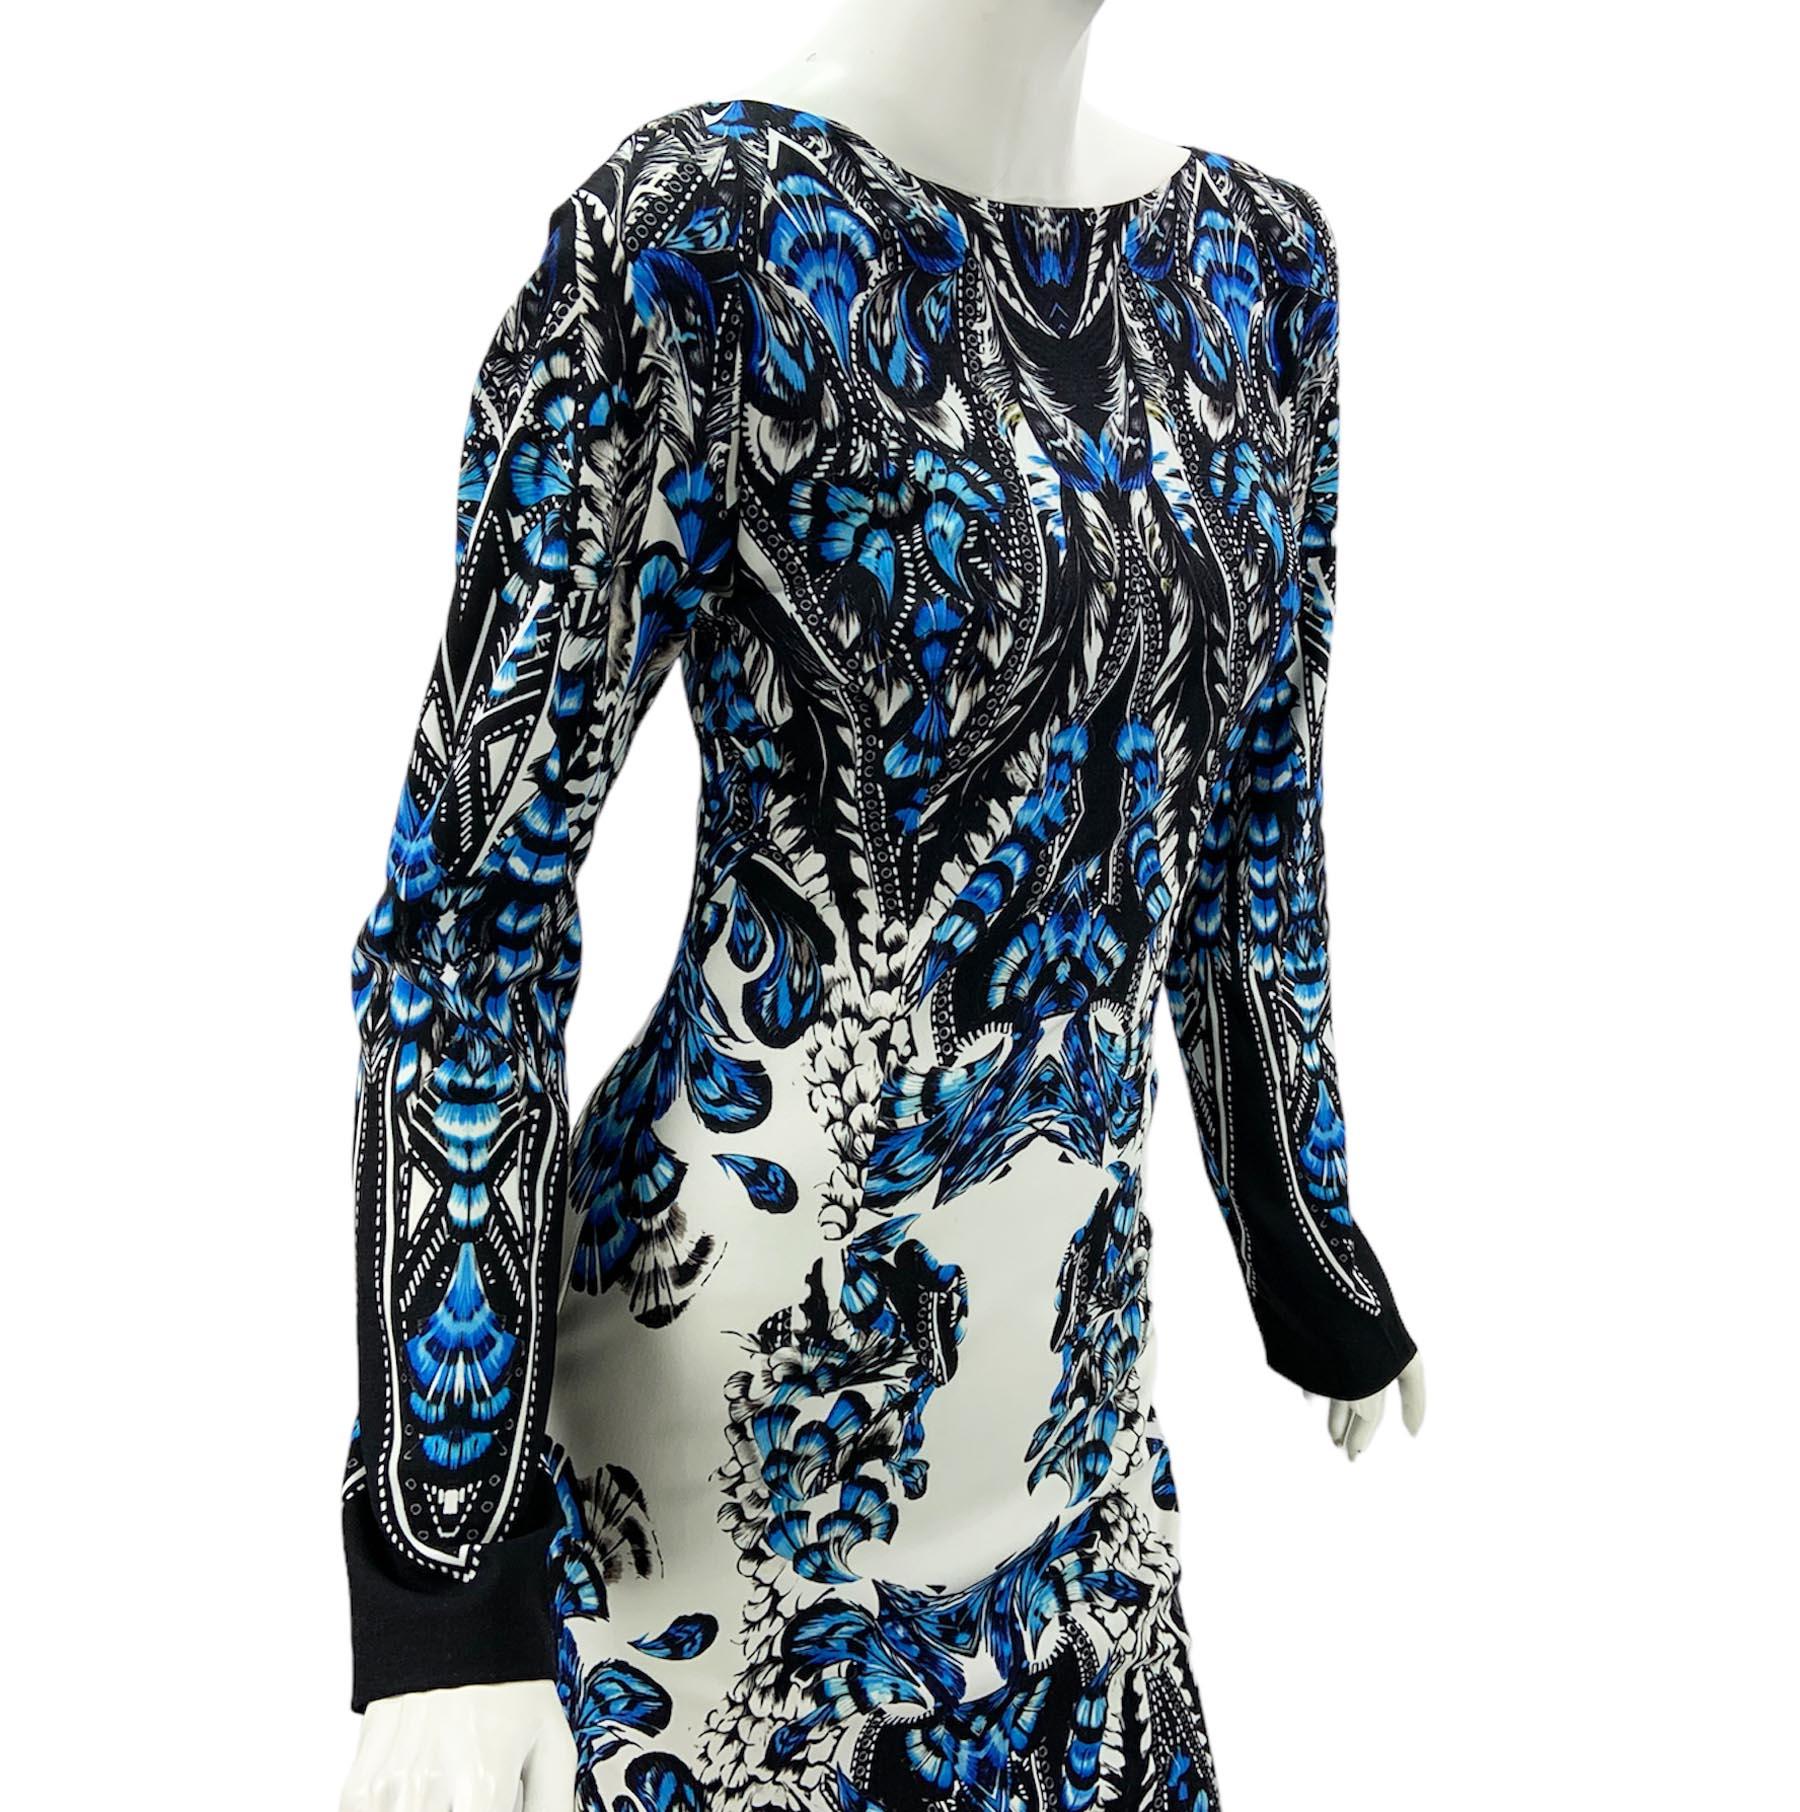 New Roberto Cavalli Feather Print Blue White Dress Gown Italian 36 For Sale 3